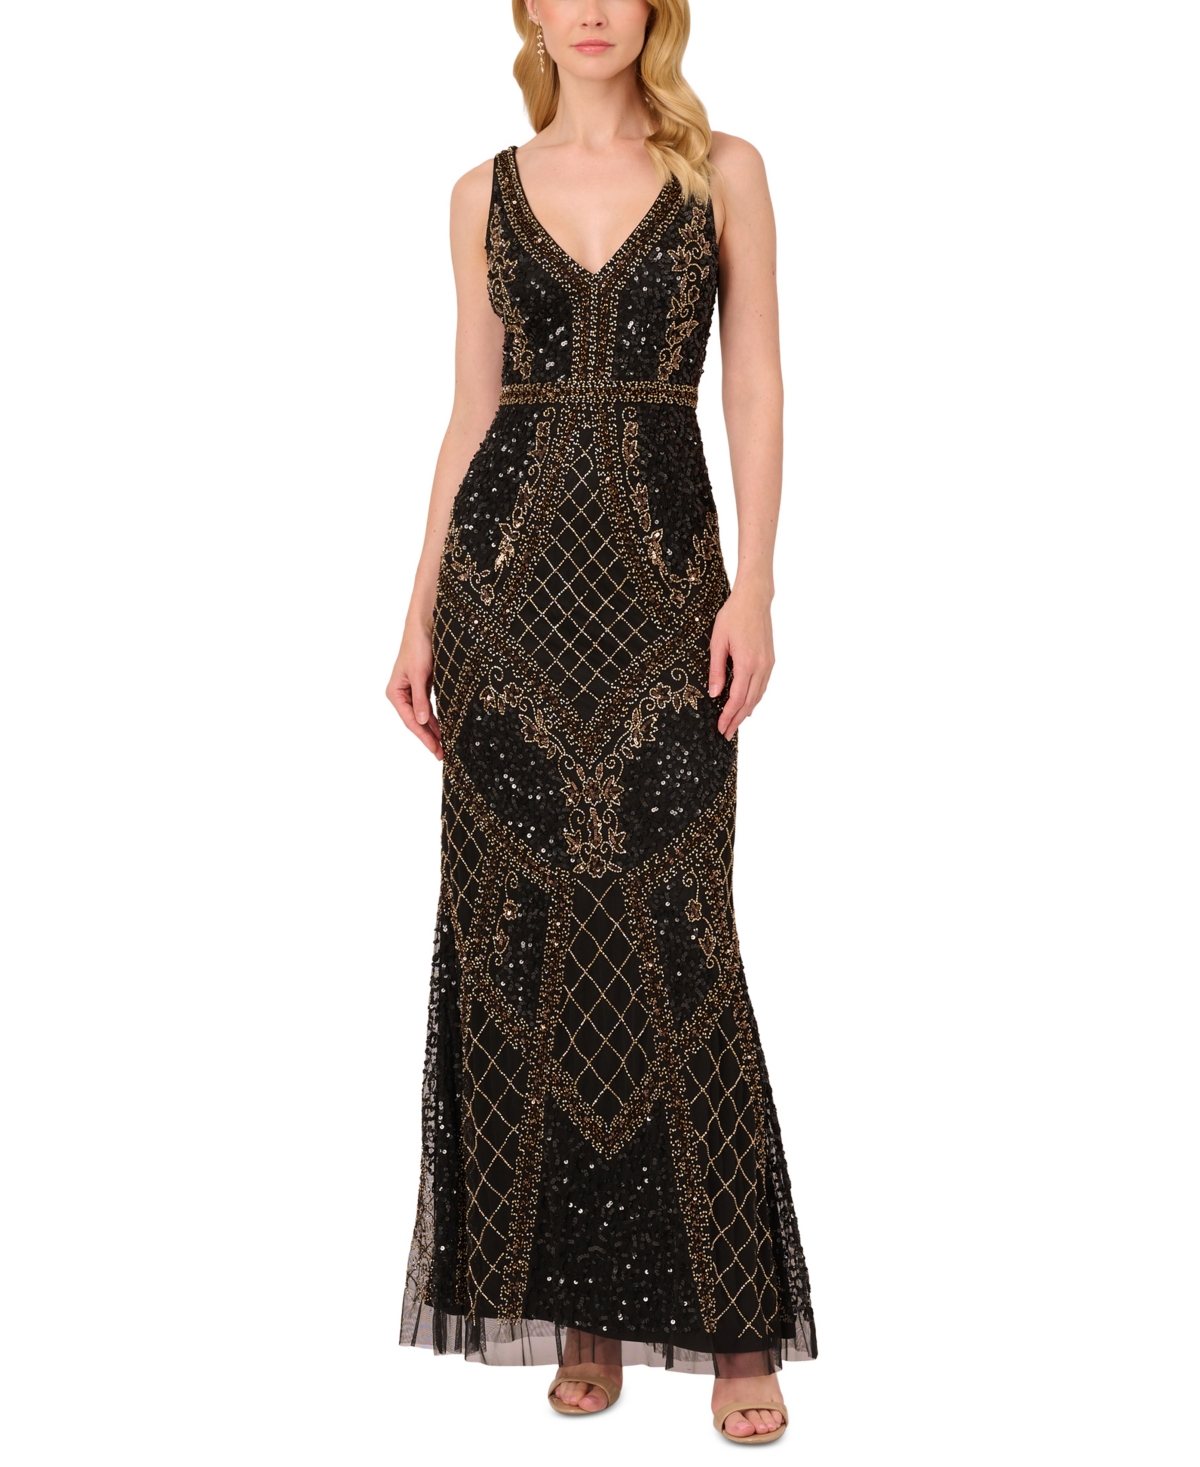 1920s Downton Abbey Dresses Adrianna Papell Womens Beaded Mesh Column Gown - Black Gold $349.00 AT vintagedancer.com